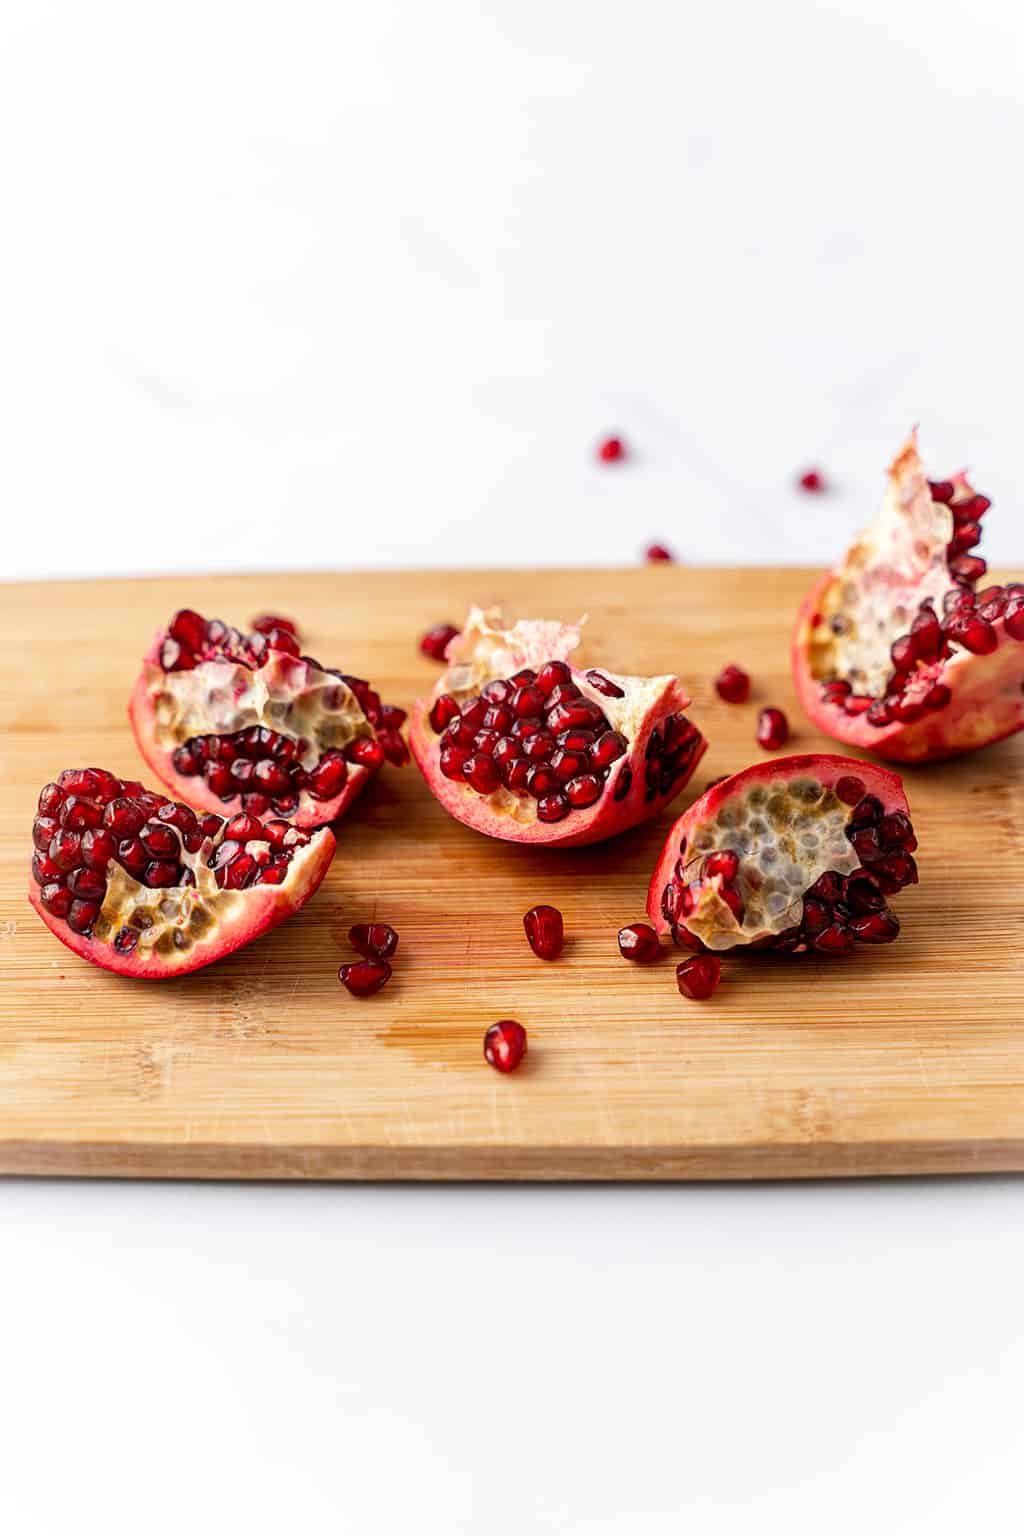 four pomegranate pieces on wooden cutting board